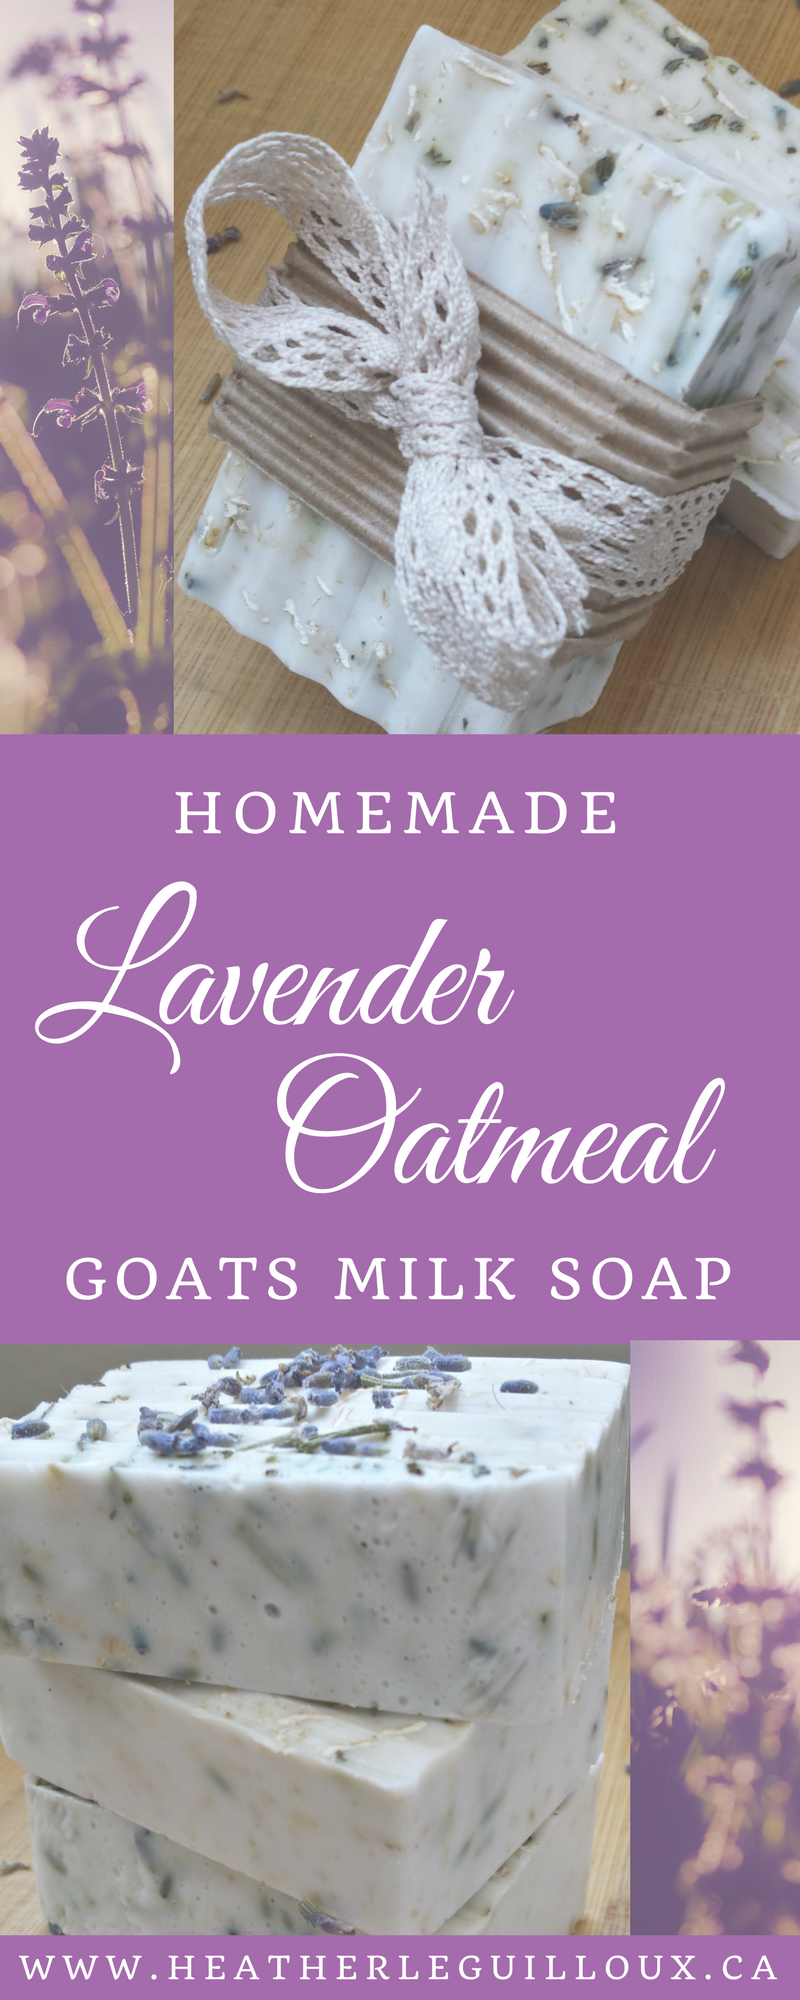 Learn how to make your own homemade lavender oatmeal goats milk soap at home - made with doTERRA Lavender essential oil. Includes recipe, ingredients, tools, and step-by-step instructions. #essentialoils #lavender #homemade #soap